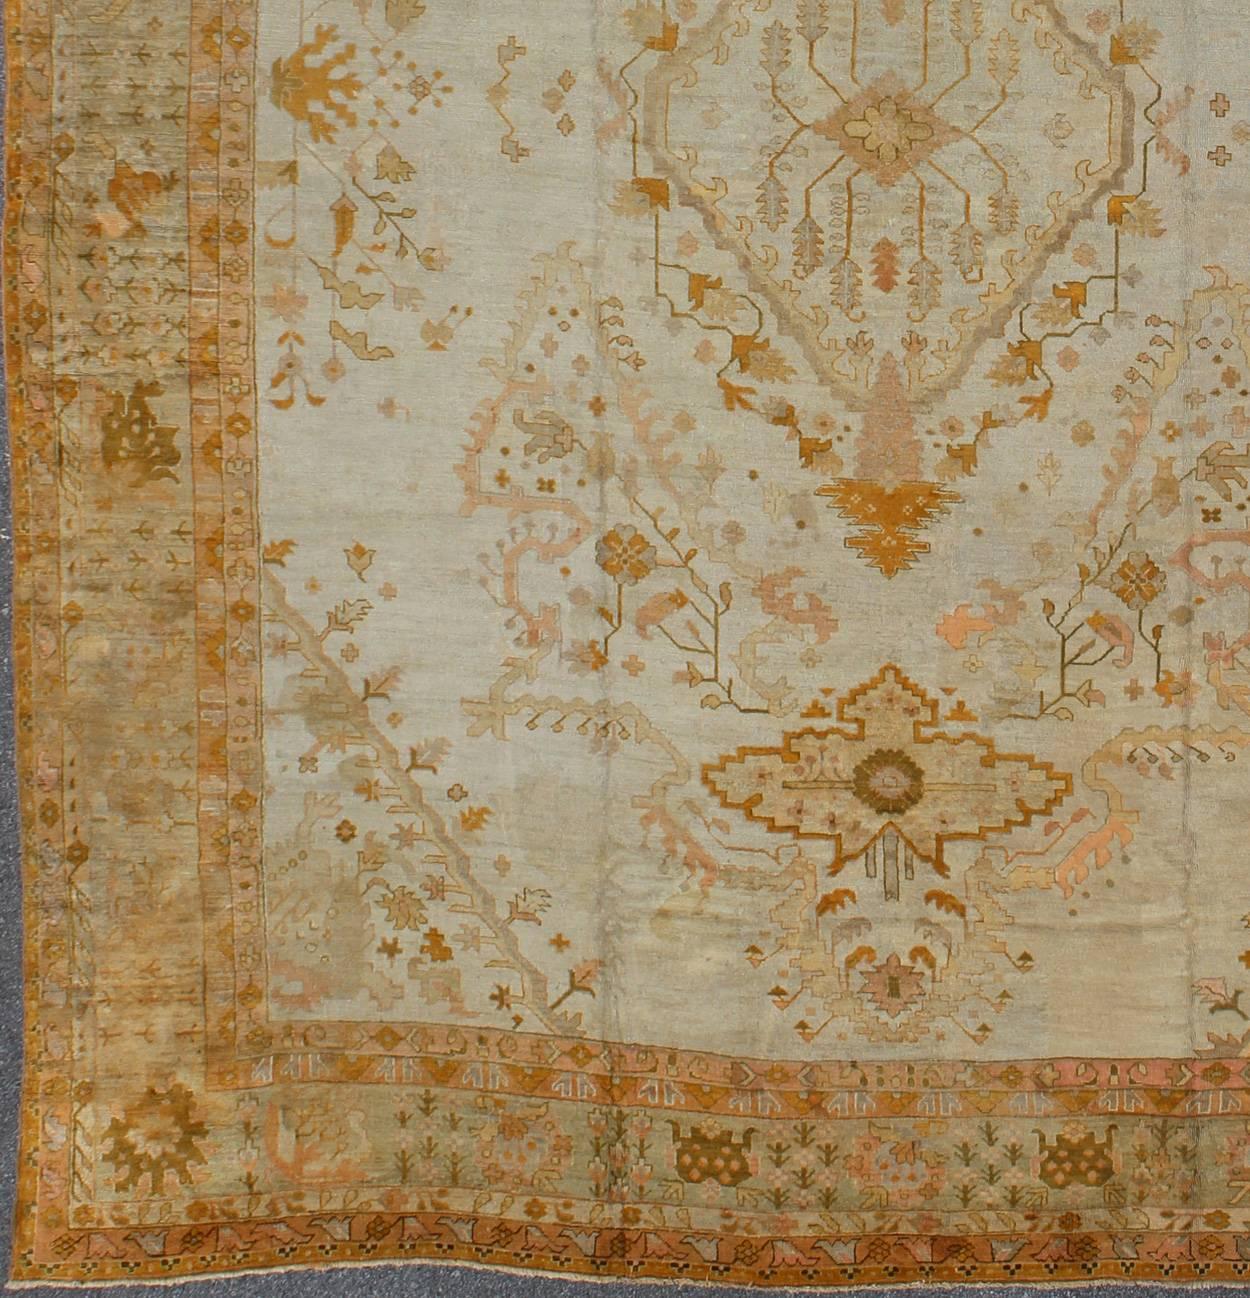 Remarkable Large Antique Turkish Oushak Carpet in silver/Ivory, gold, light green, taupe, Salmon,  yellow and orange, Rug/VR-7984

Measures: 16'7 x 21'7

The grand scale of this magnificent palace-sized antique Oushak is tempered only by its